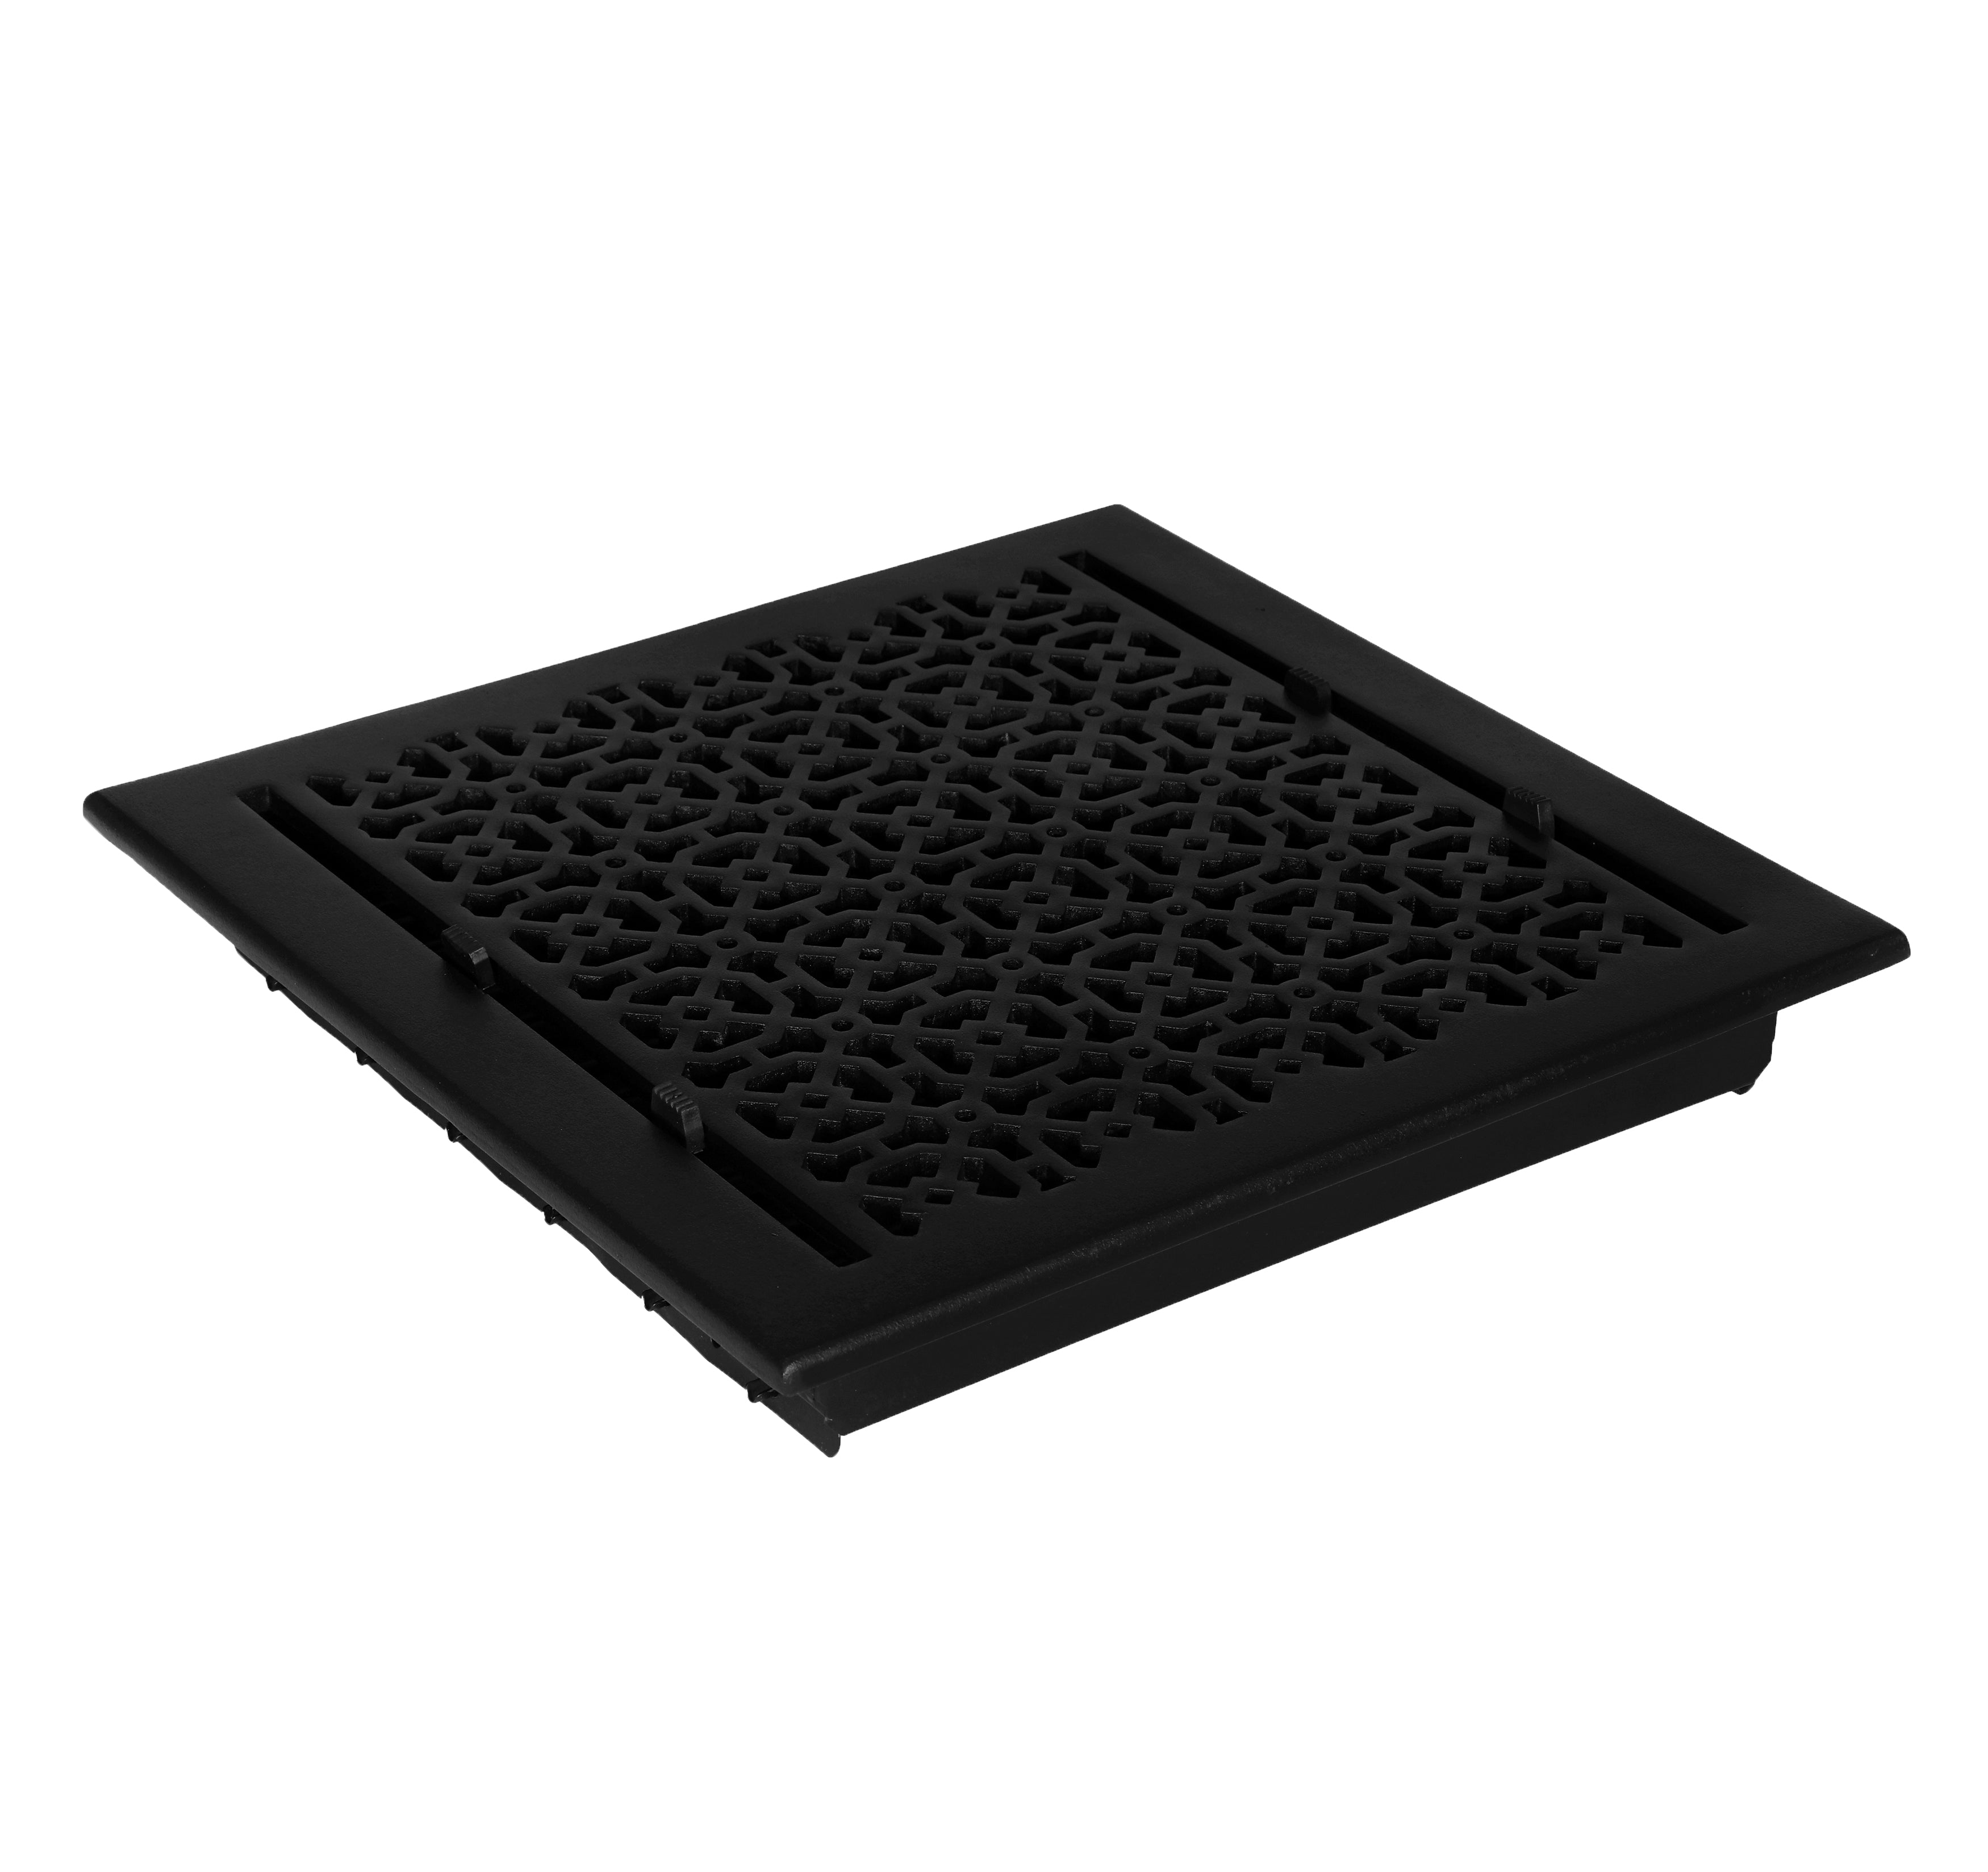 Achtek Air Supply Vent 12"x 12" Duct Opening (Overall 13-1/2"x 13-1/2"") Solid Cast Aluminium Register Cover | Powder Coated